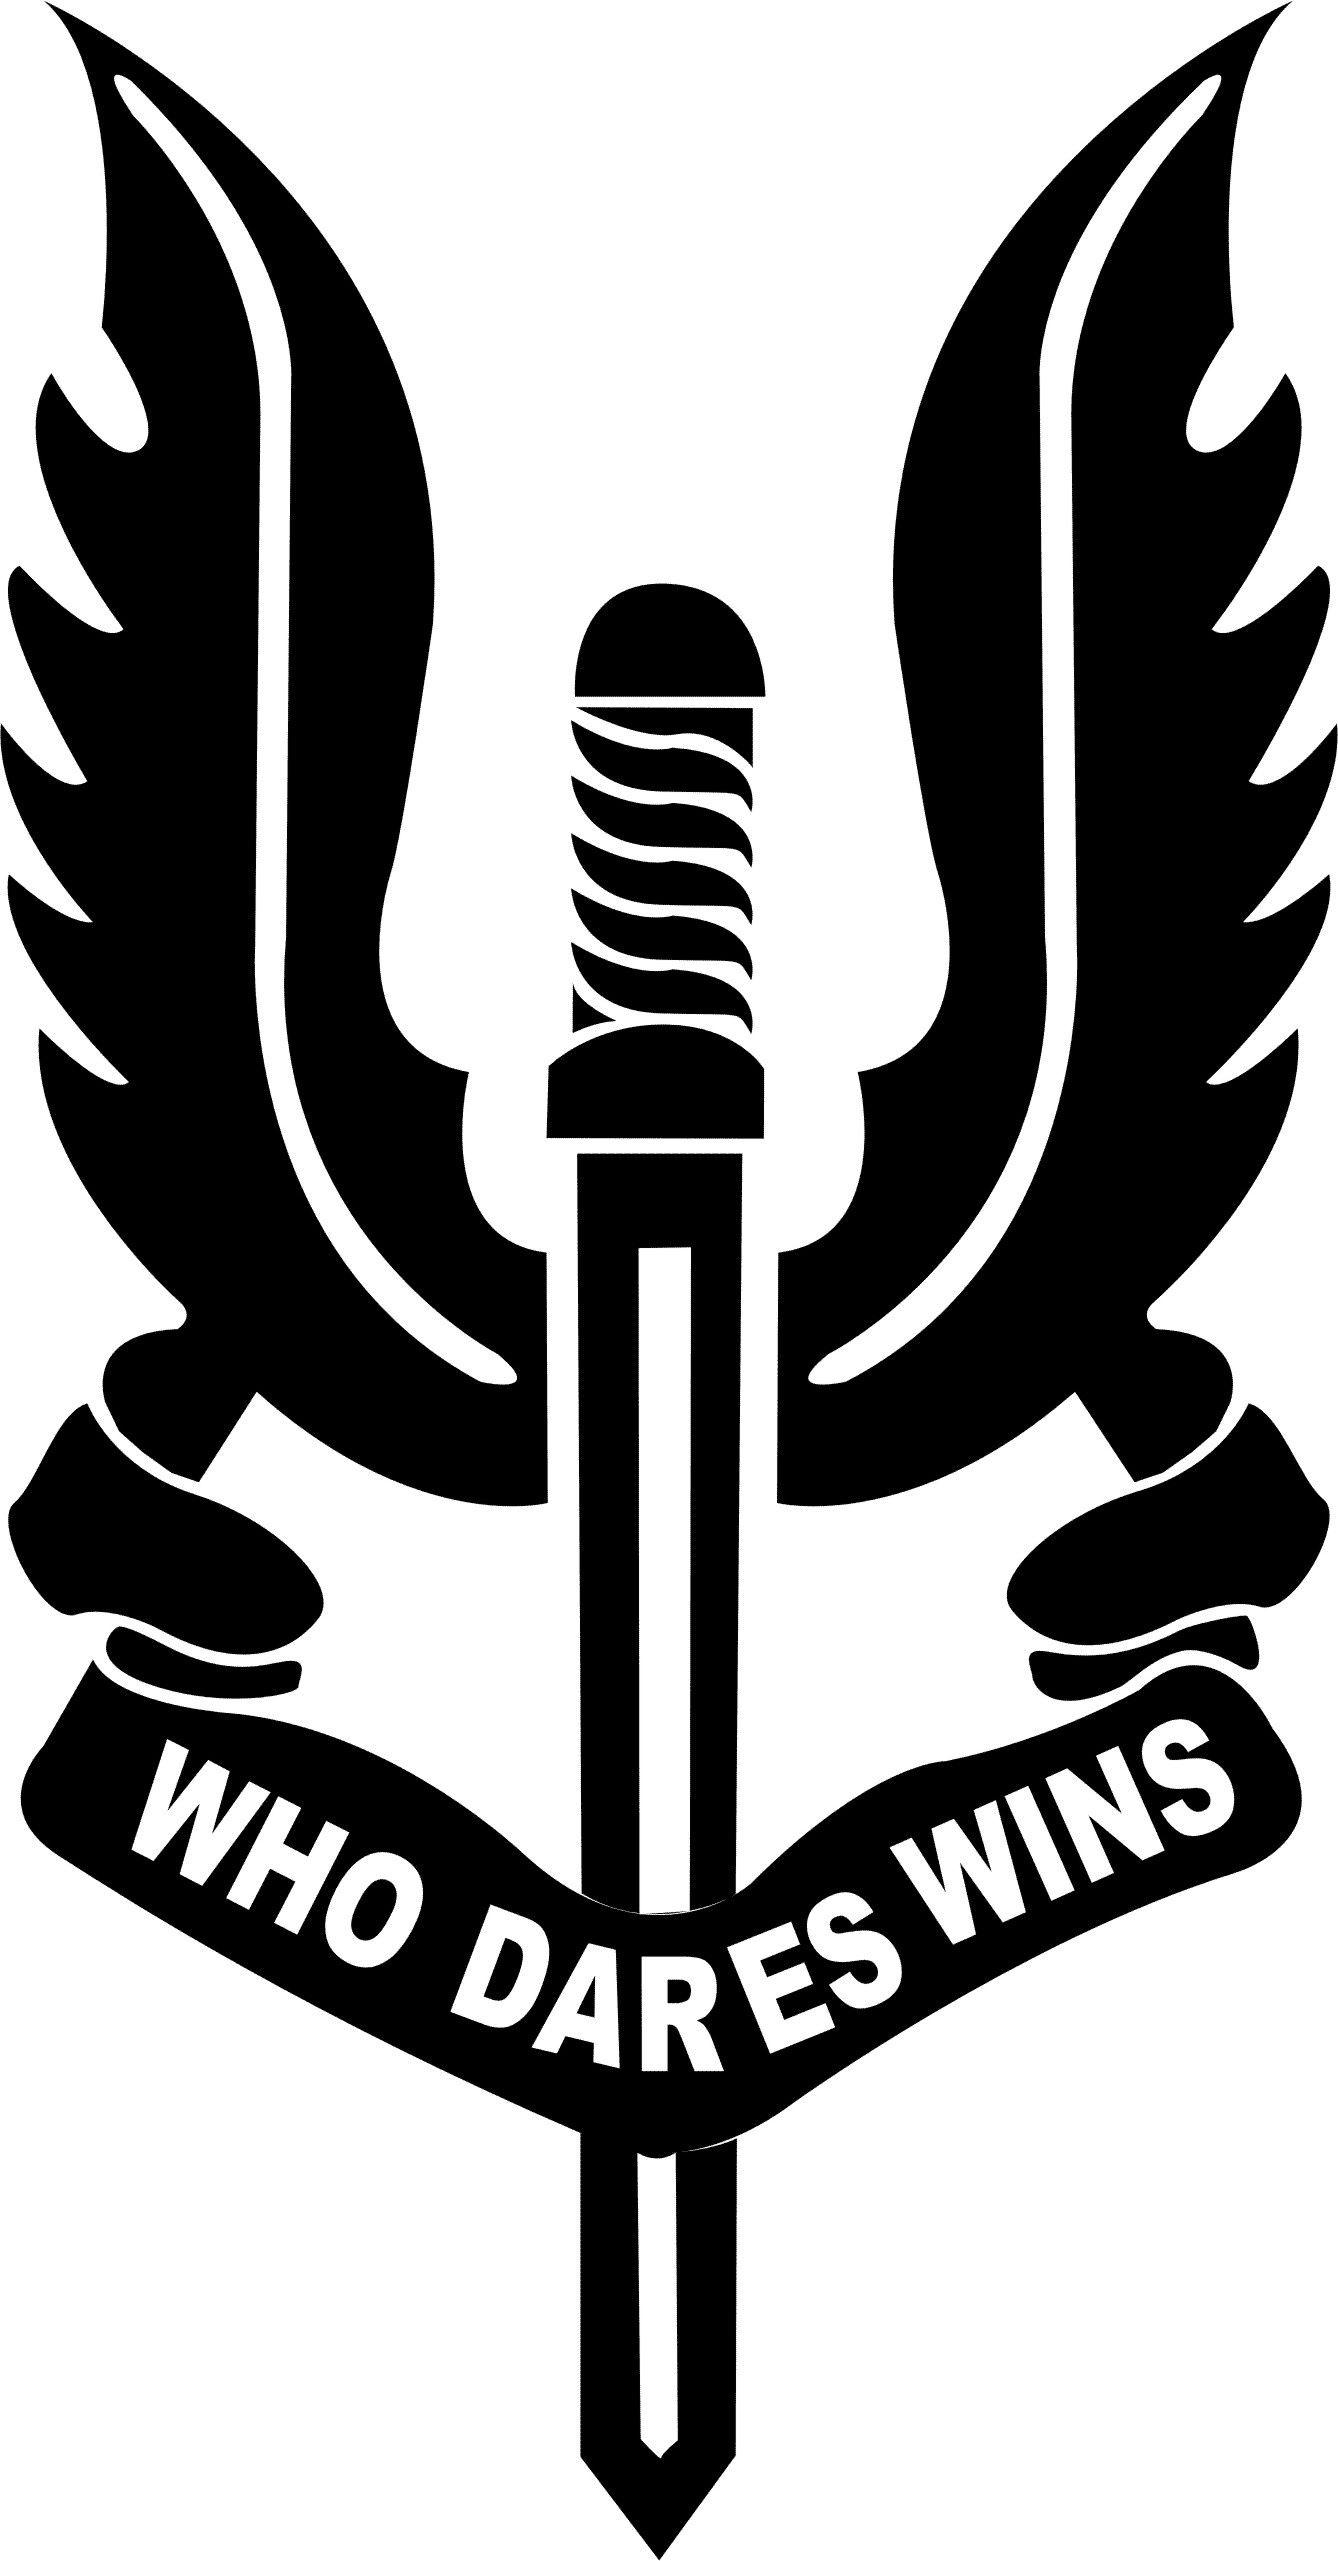 Who dares wins. Quotes to Remember. Military, Special